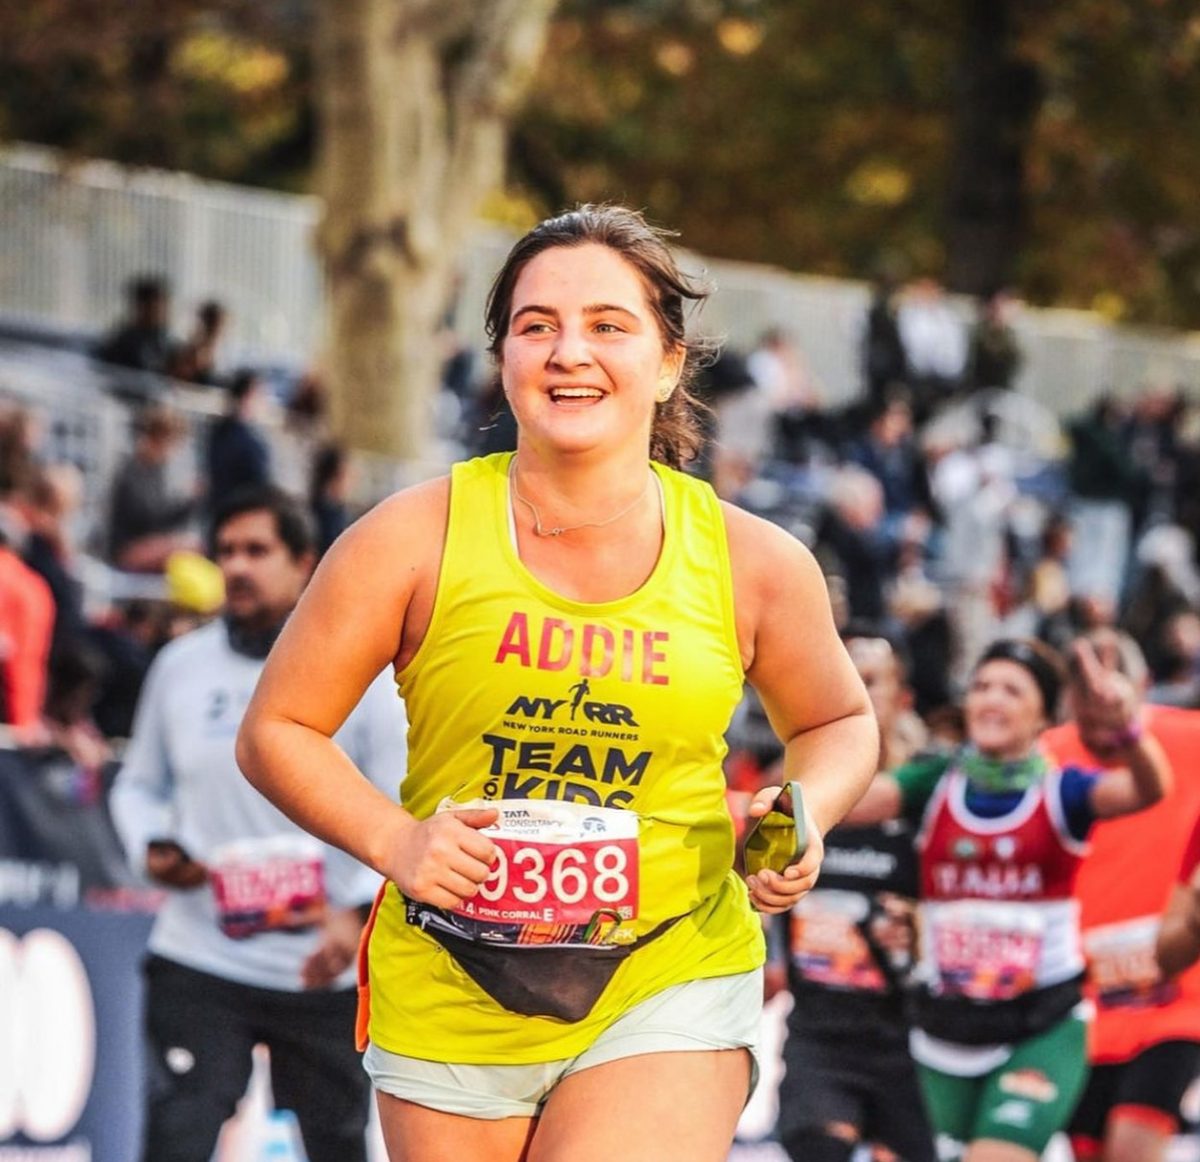 Addie-Grace Cook, ‘26, runs with a smile through the boroughs of New York City in early November, completing a marathon. Photo courtesy of Cook